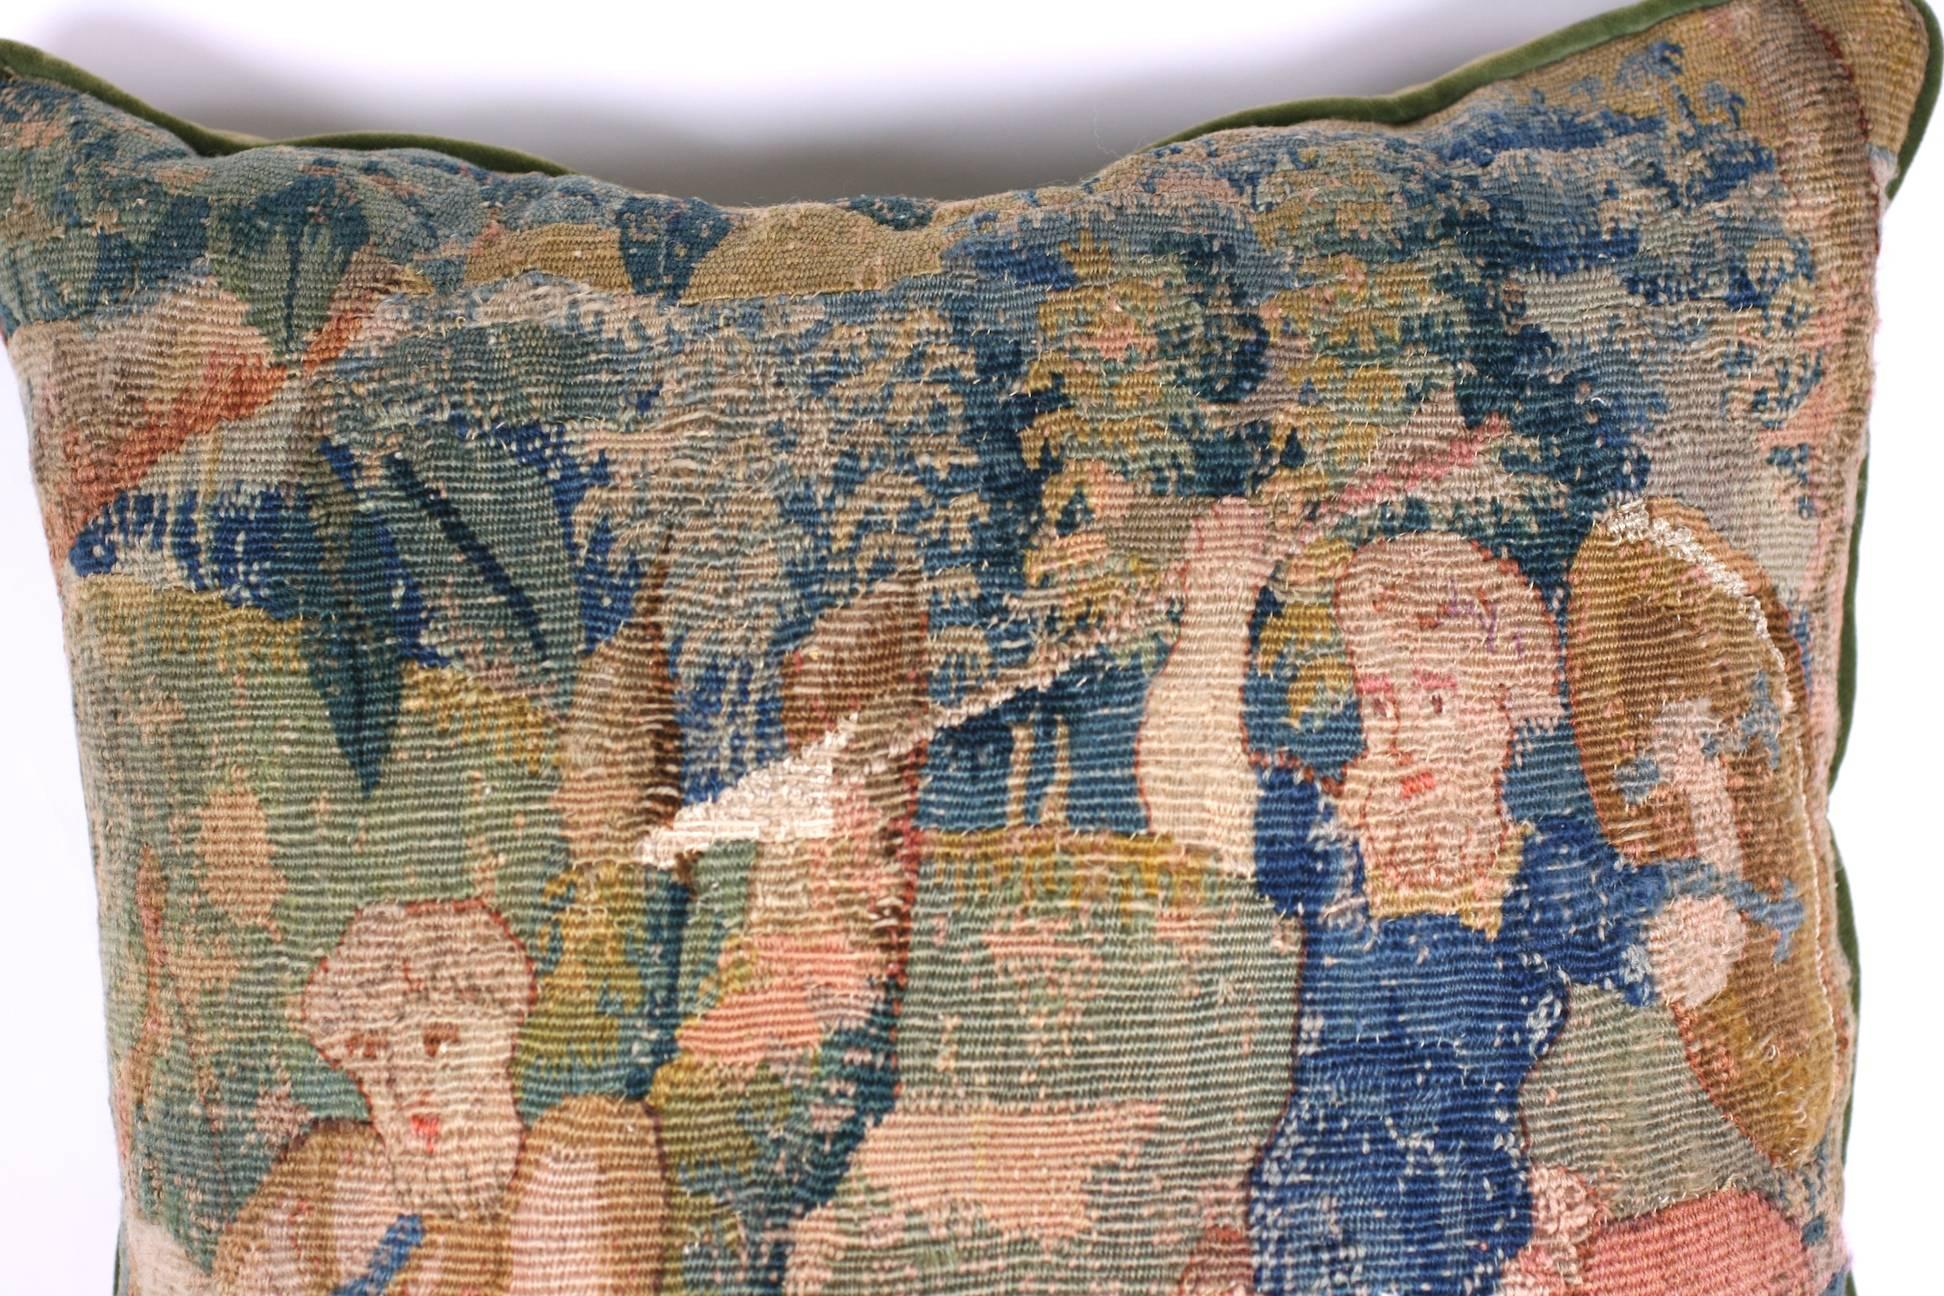 Aubusson tapestry cushion of battling Satyrs, likely created from a textile from the late 18th century. Cotton velvet backing with piping. Excellent condition.
Measures: 20